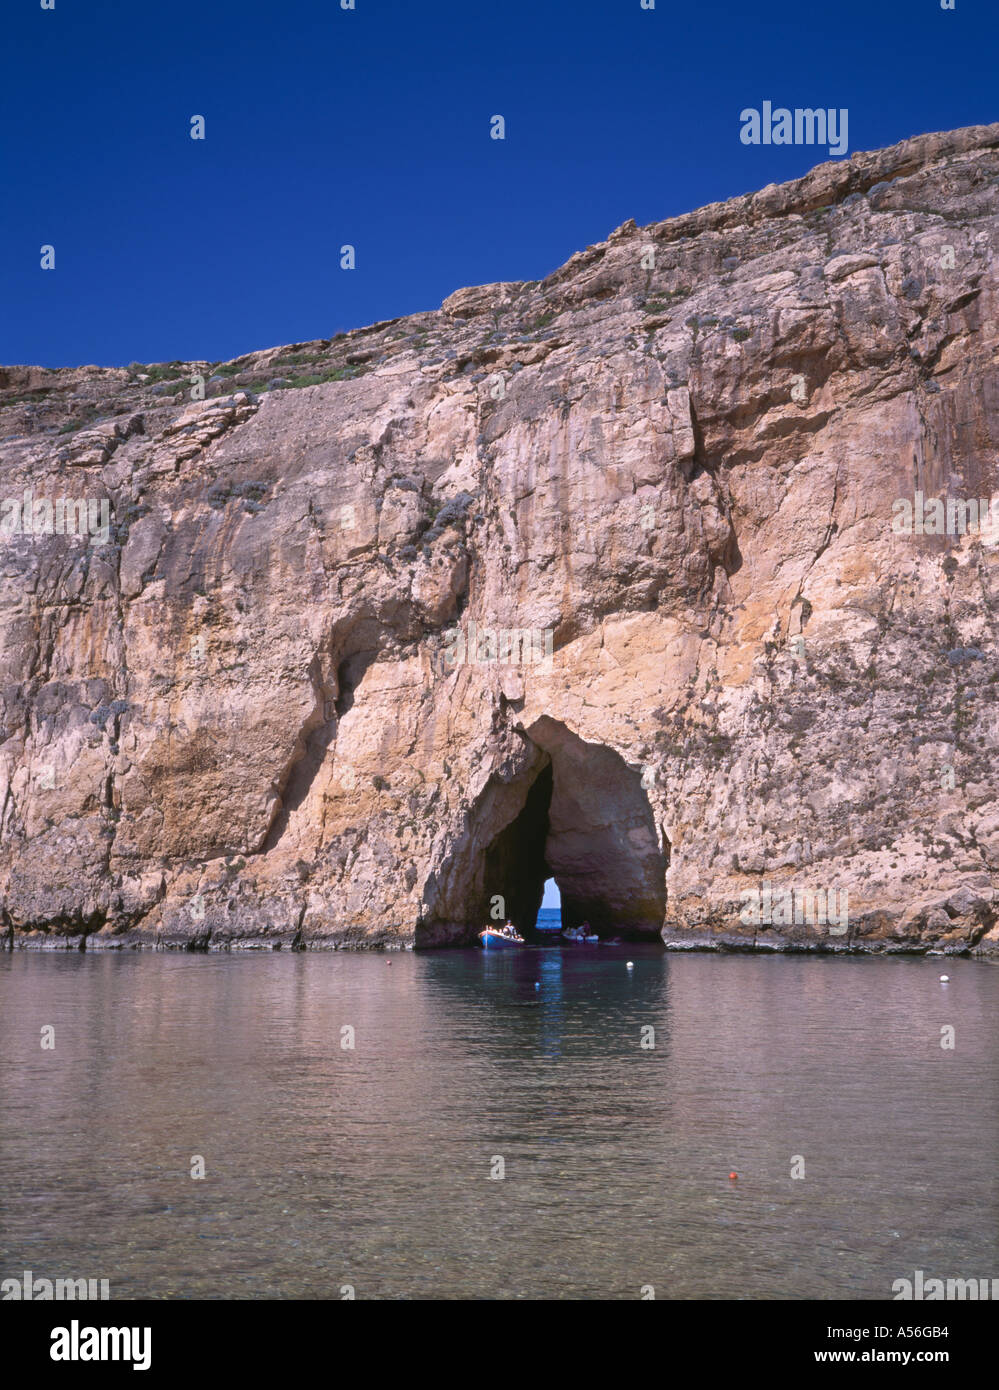 Tourist boats in the natural tunnel which connects the Inland Sea Il Qawra to the Mediterranean Dwejra Point Gozo Malta Stock Photo